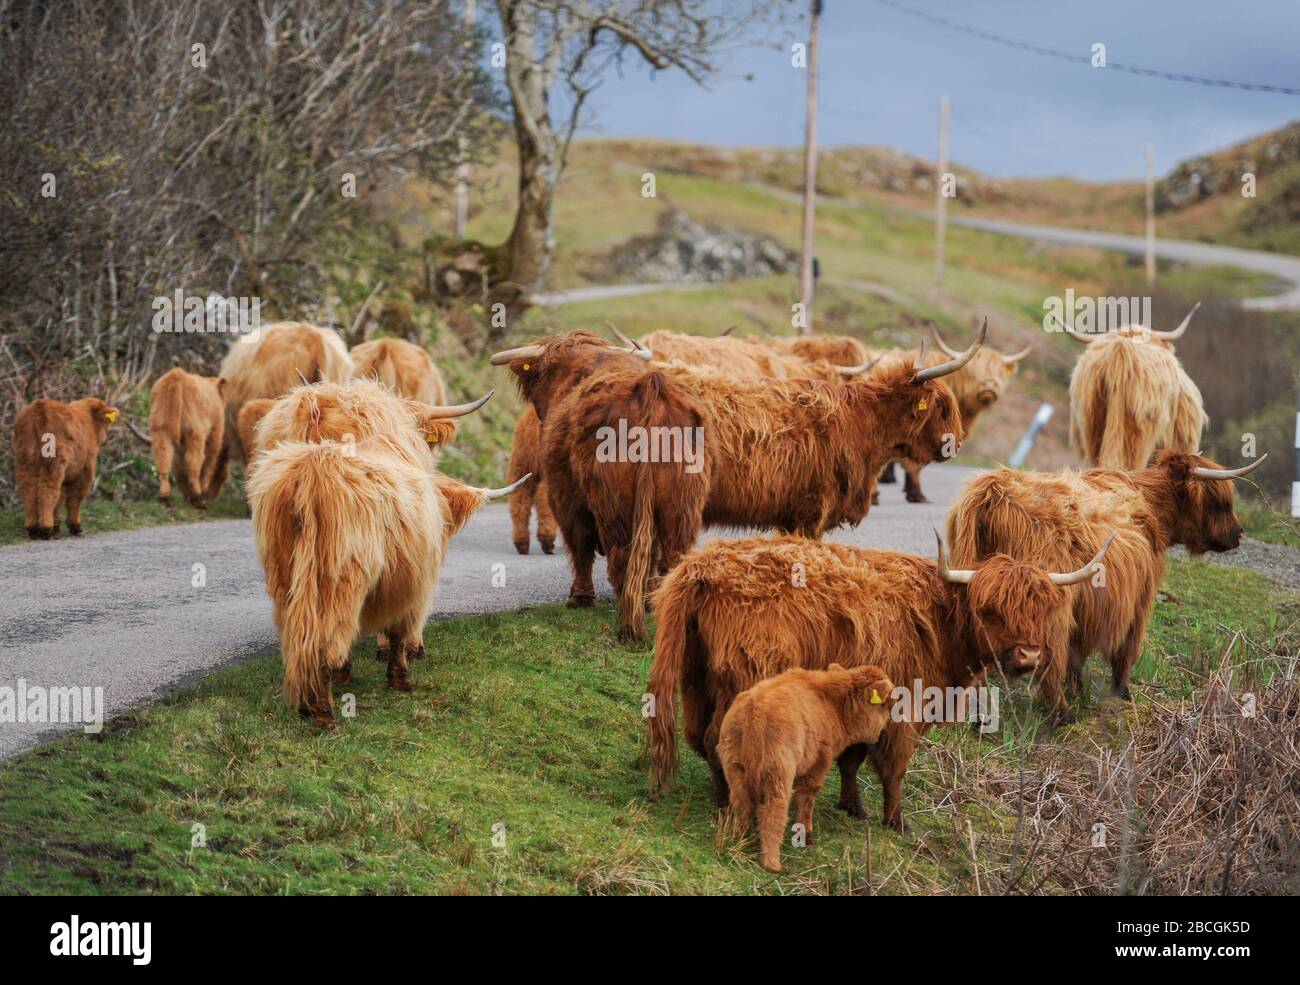 A herd of Highland cattle, Isle of Mull, Scotland. Stock Photo